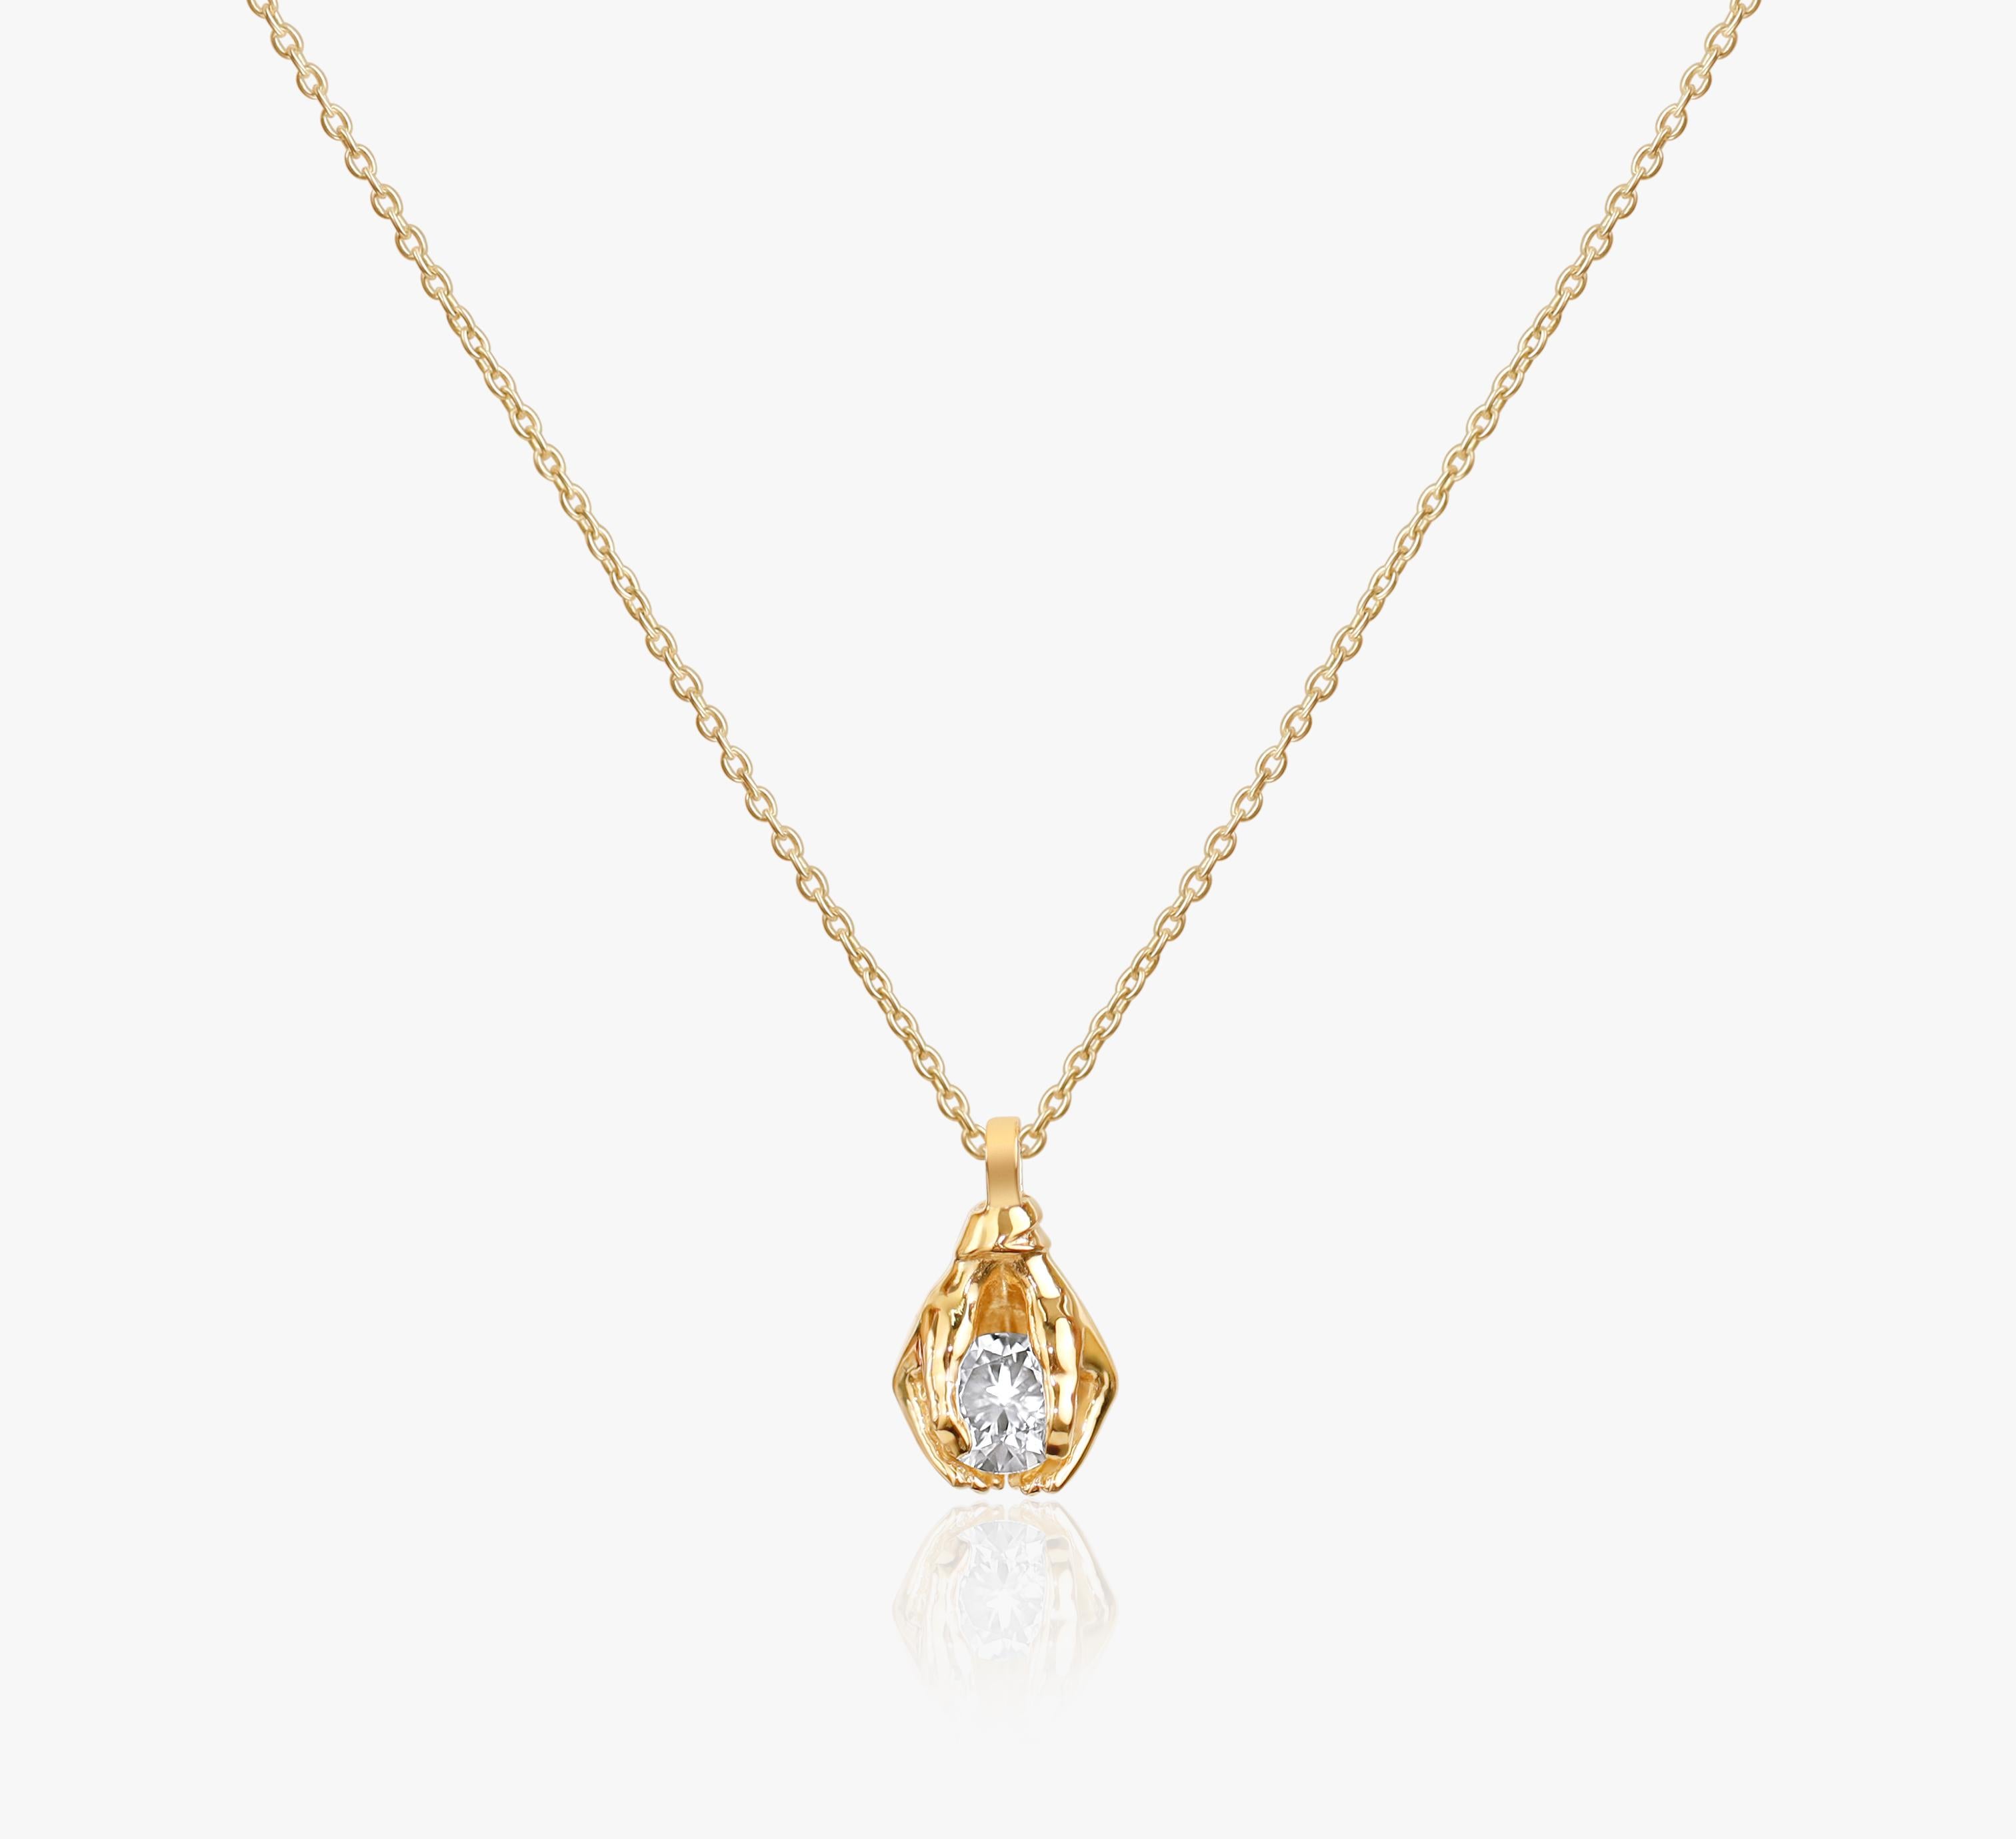 GIA Report Certified 1.5 Carat F VS Round Cut Diamond Pendant Necklace

Available in 18k Yellow gold.

Same design can be made also with other custom gemstones per request.

Product details:

- Solid gold 18k yellow 

- Main stone - approx. 1.5